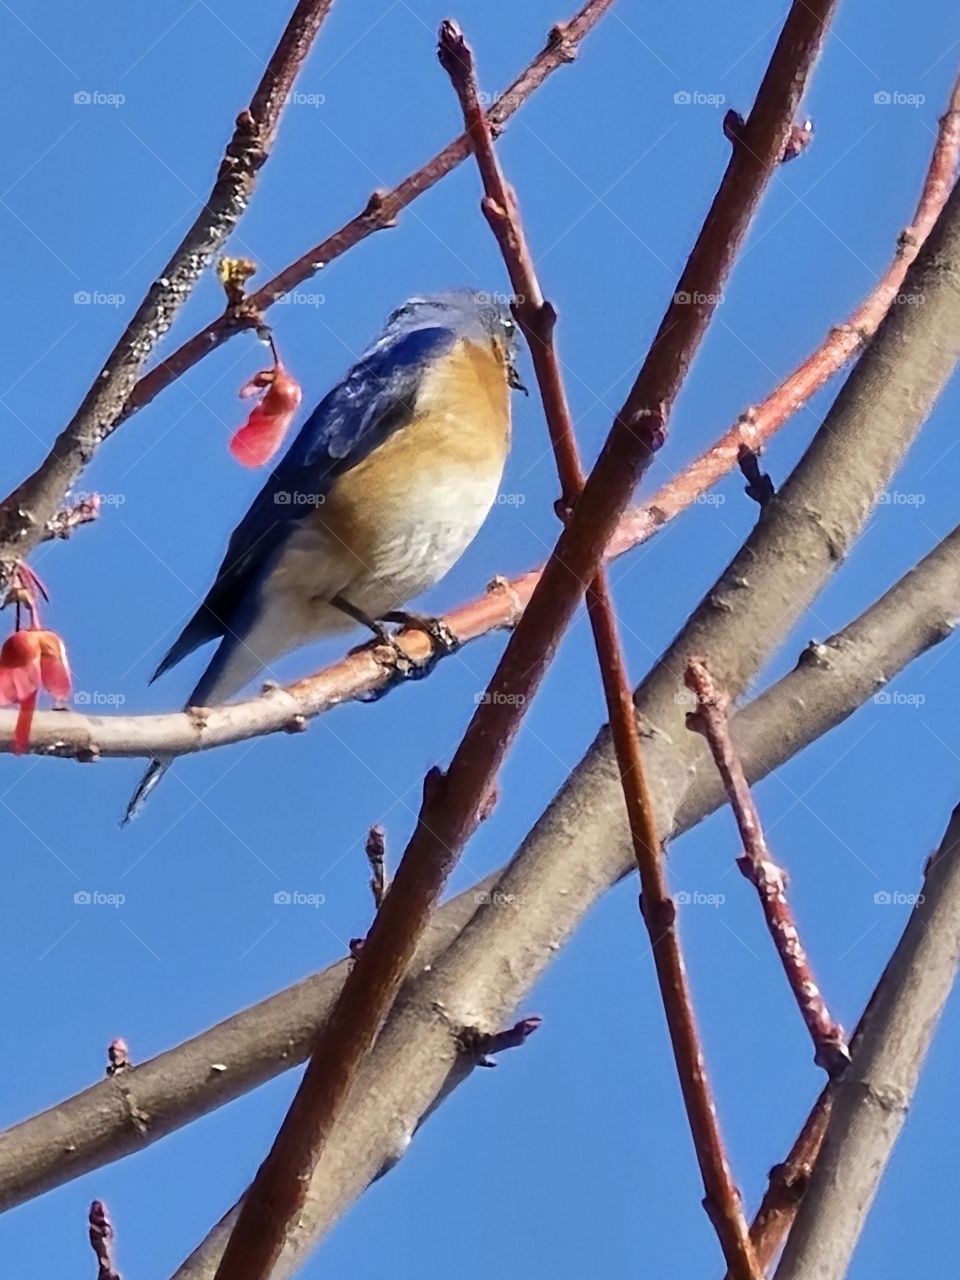 an Eastern Bluebird perched on the branch of a tree with budding signs of springs arrival with the backdrop of the beautiful clear blue sky